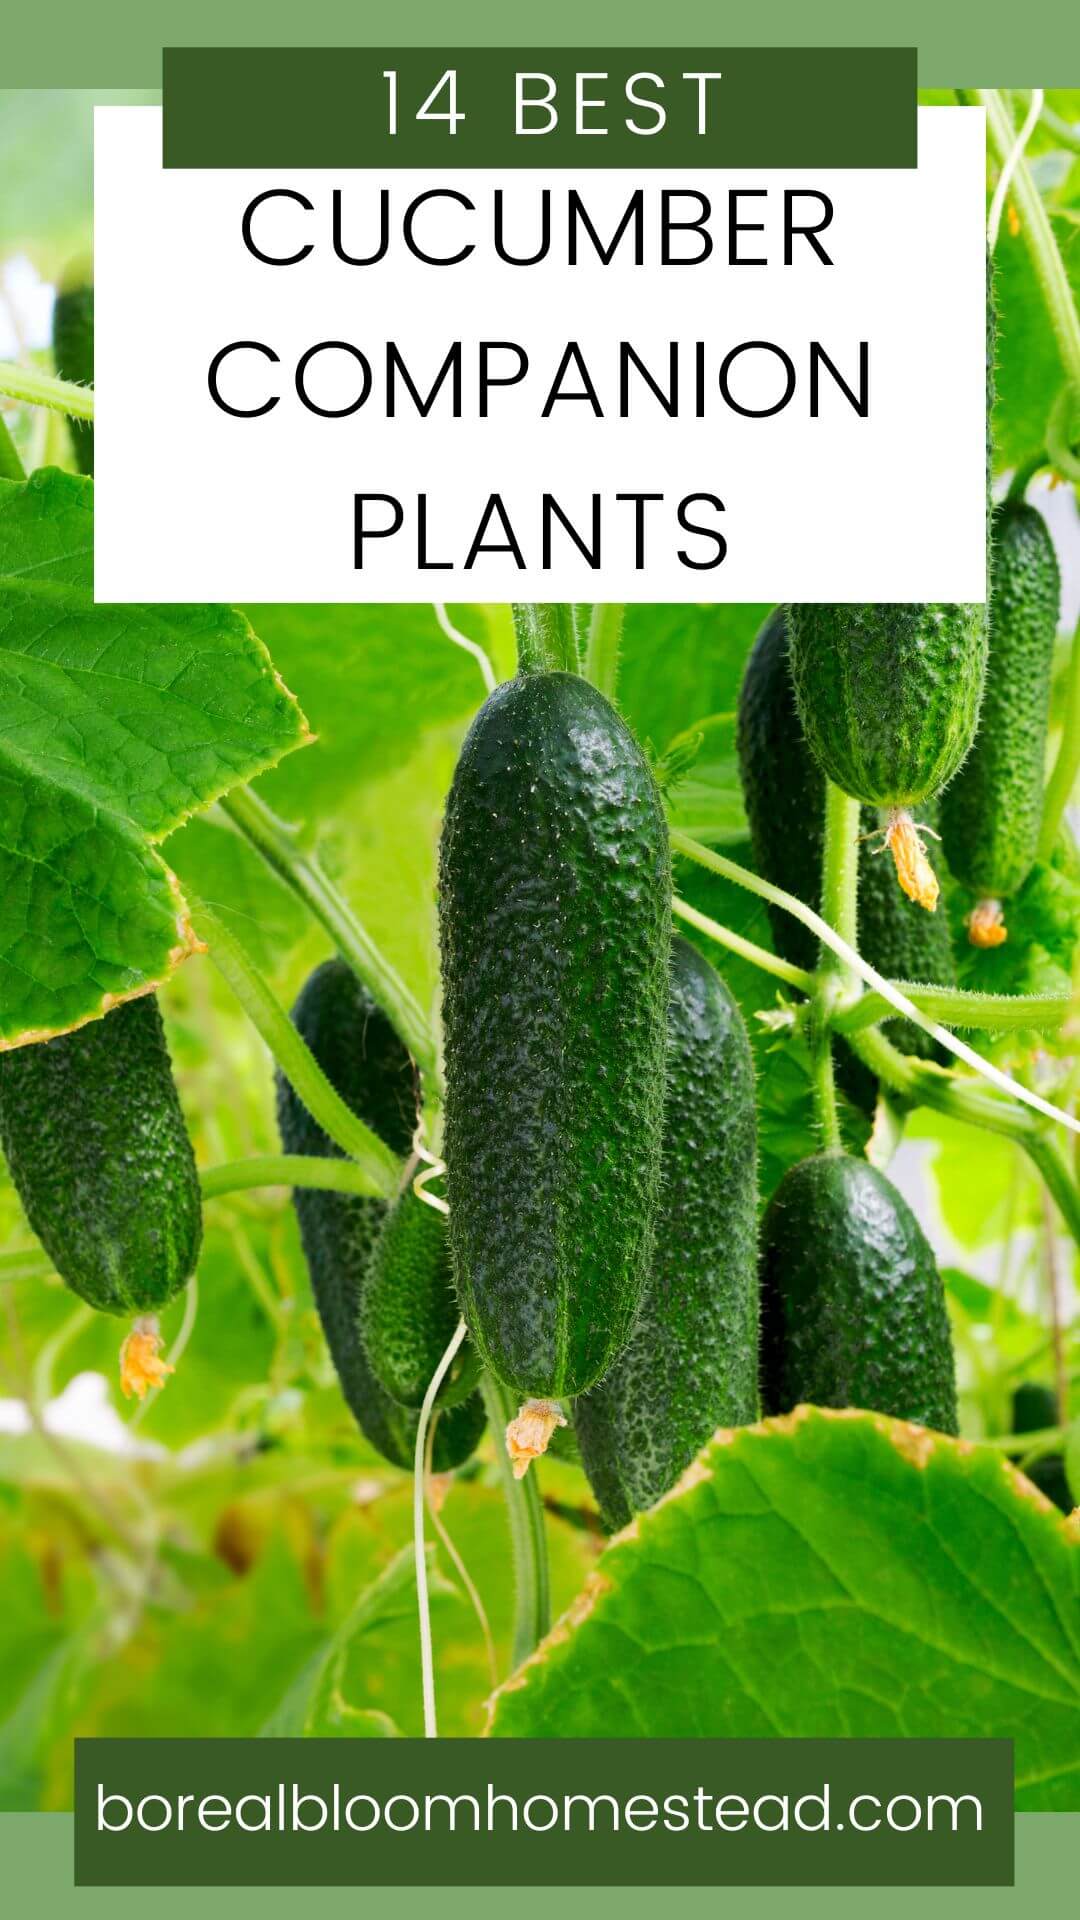 Cucumber plant with text overlay : 14 best cucumber companion plants.
